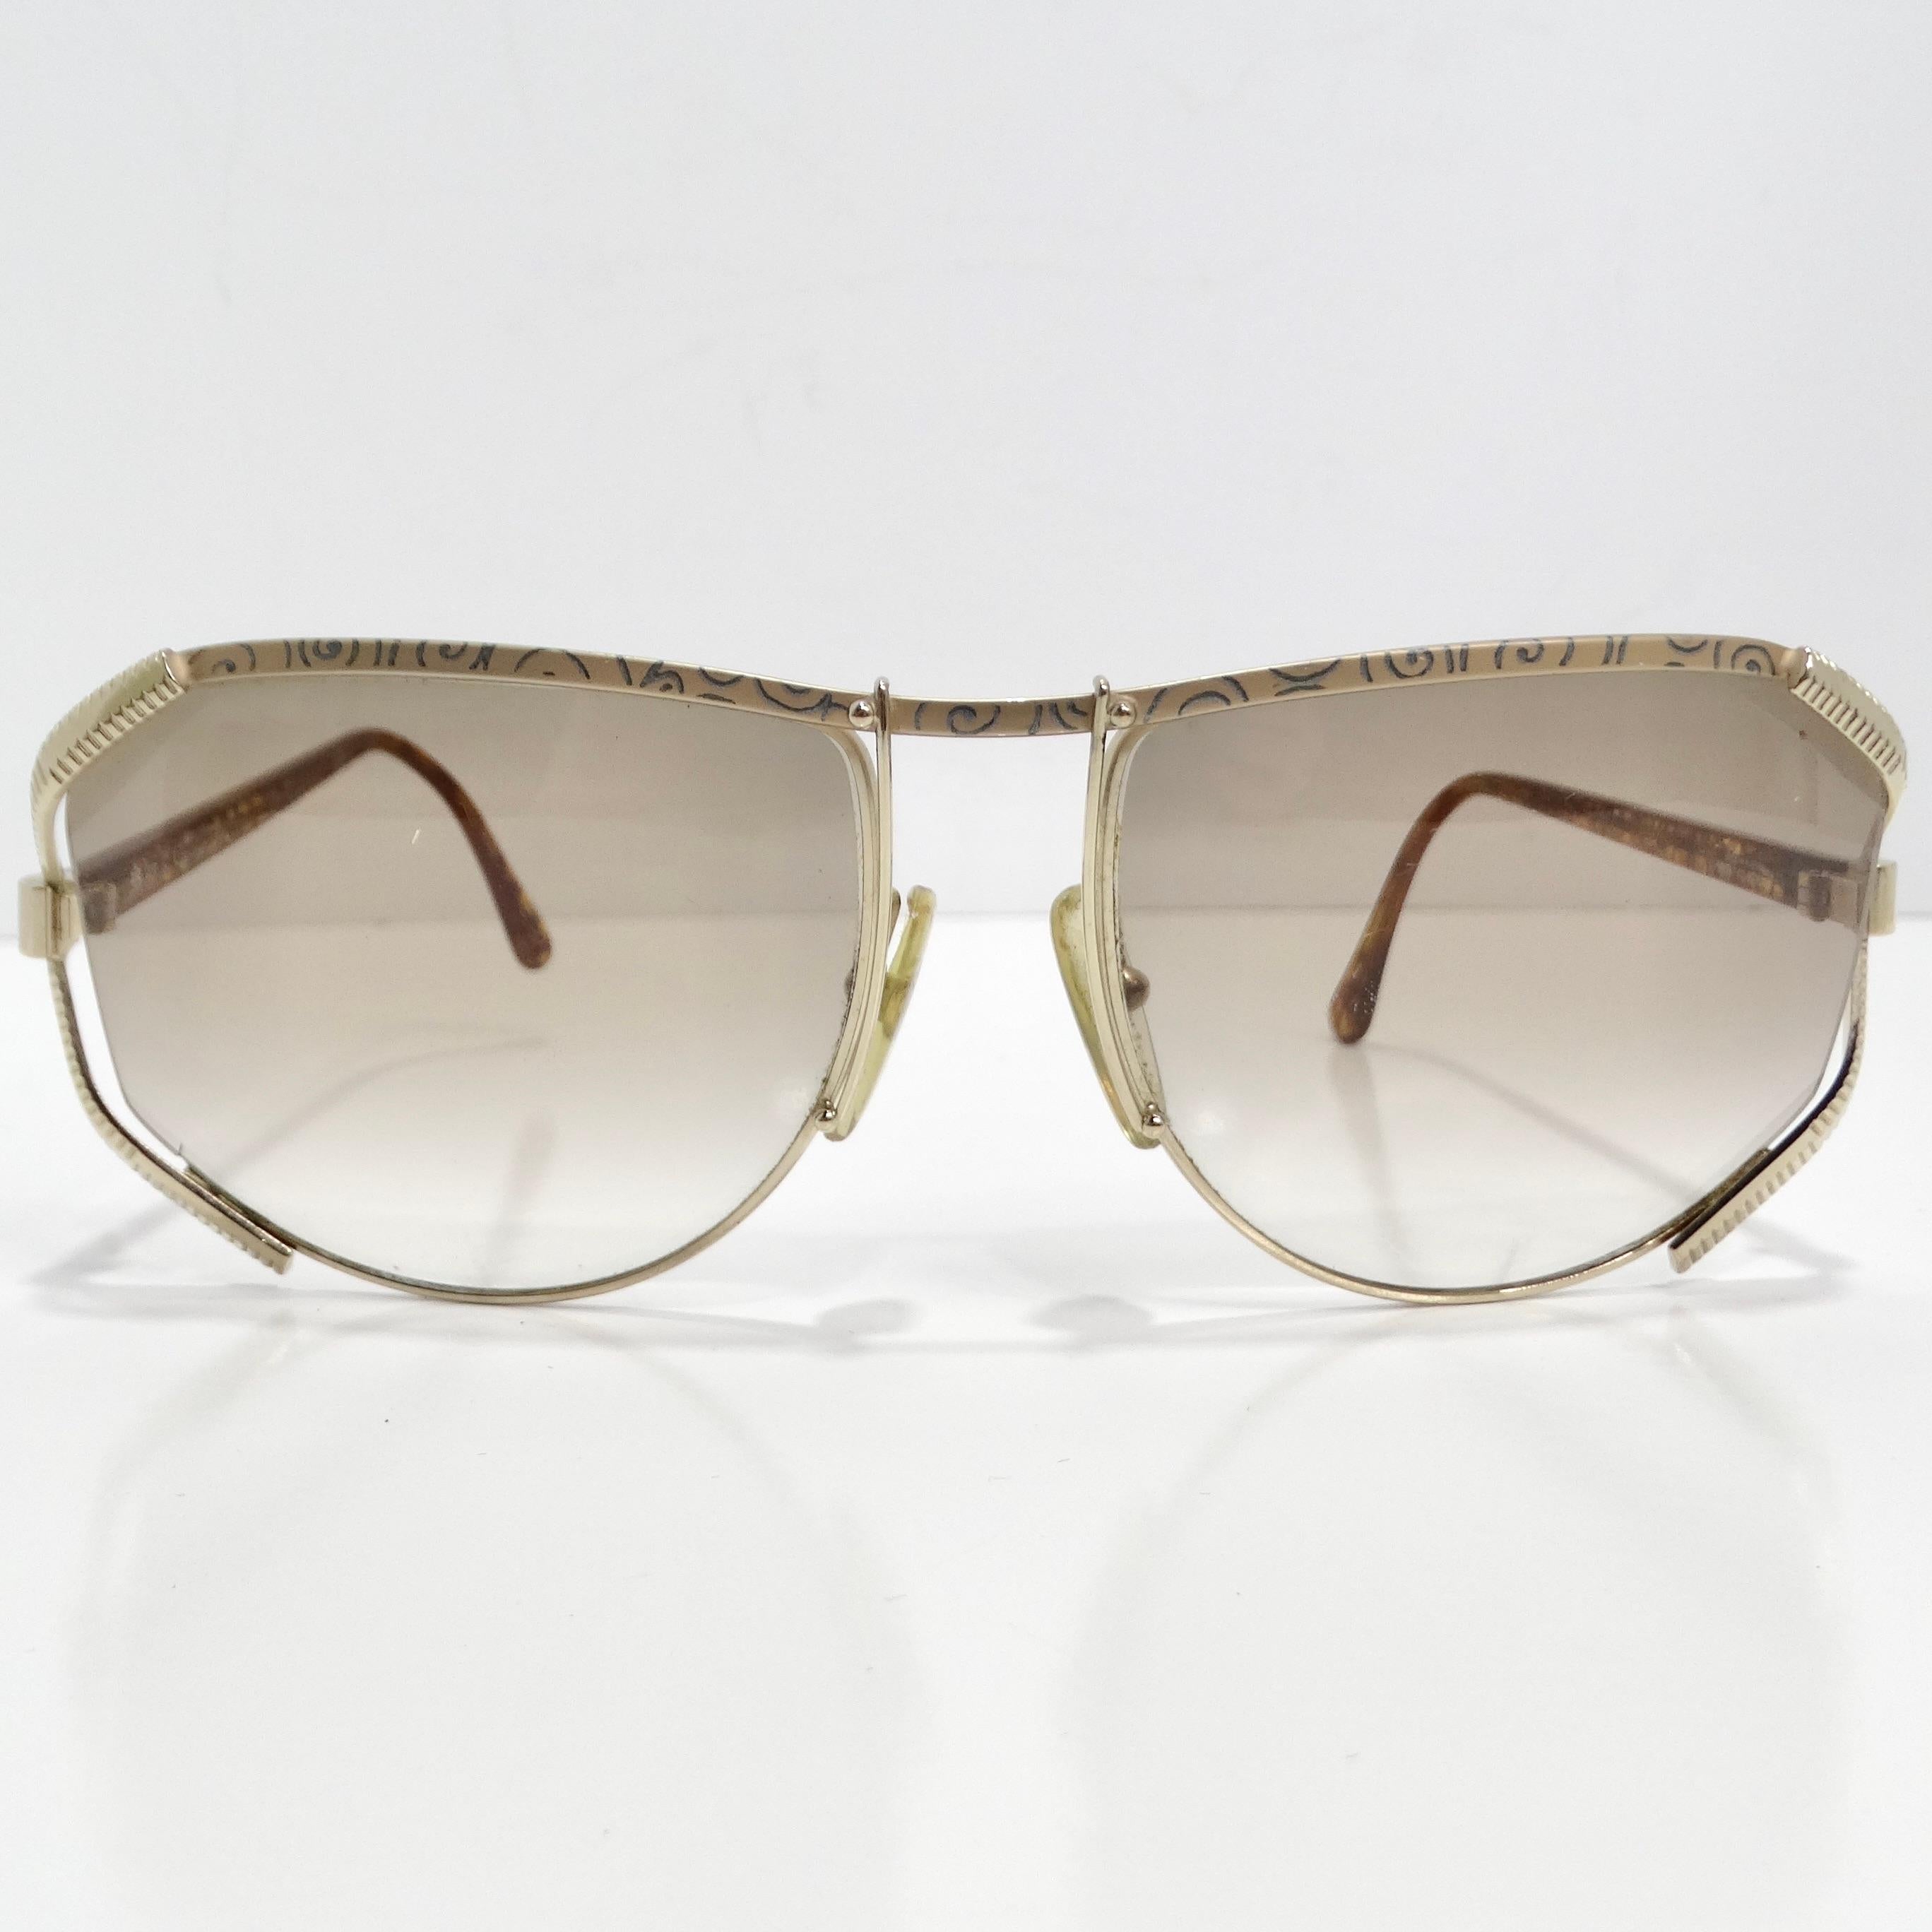 Introducing the Christian Dior 1980s Gold Tone Aviator Sunglasses, a stunning vintage piece that encapsulates the glamour and sophistication of the era. These iconic sunglasses boast a timeless aviator silhouette with exquisite detailing that exudes